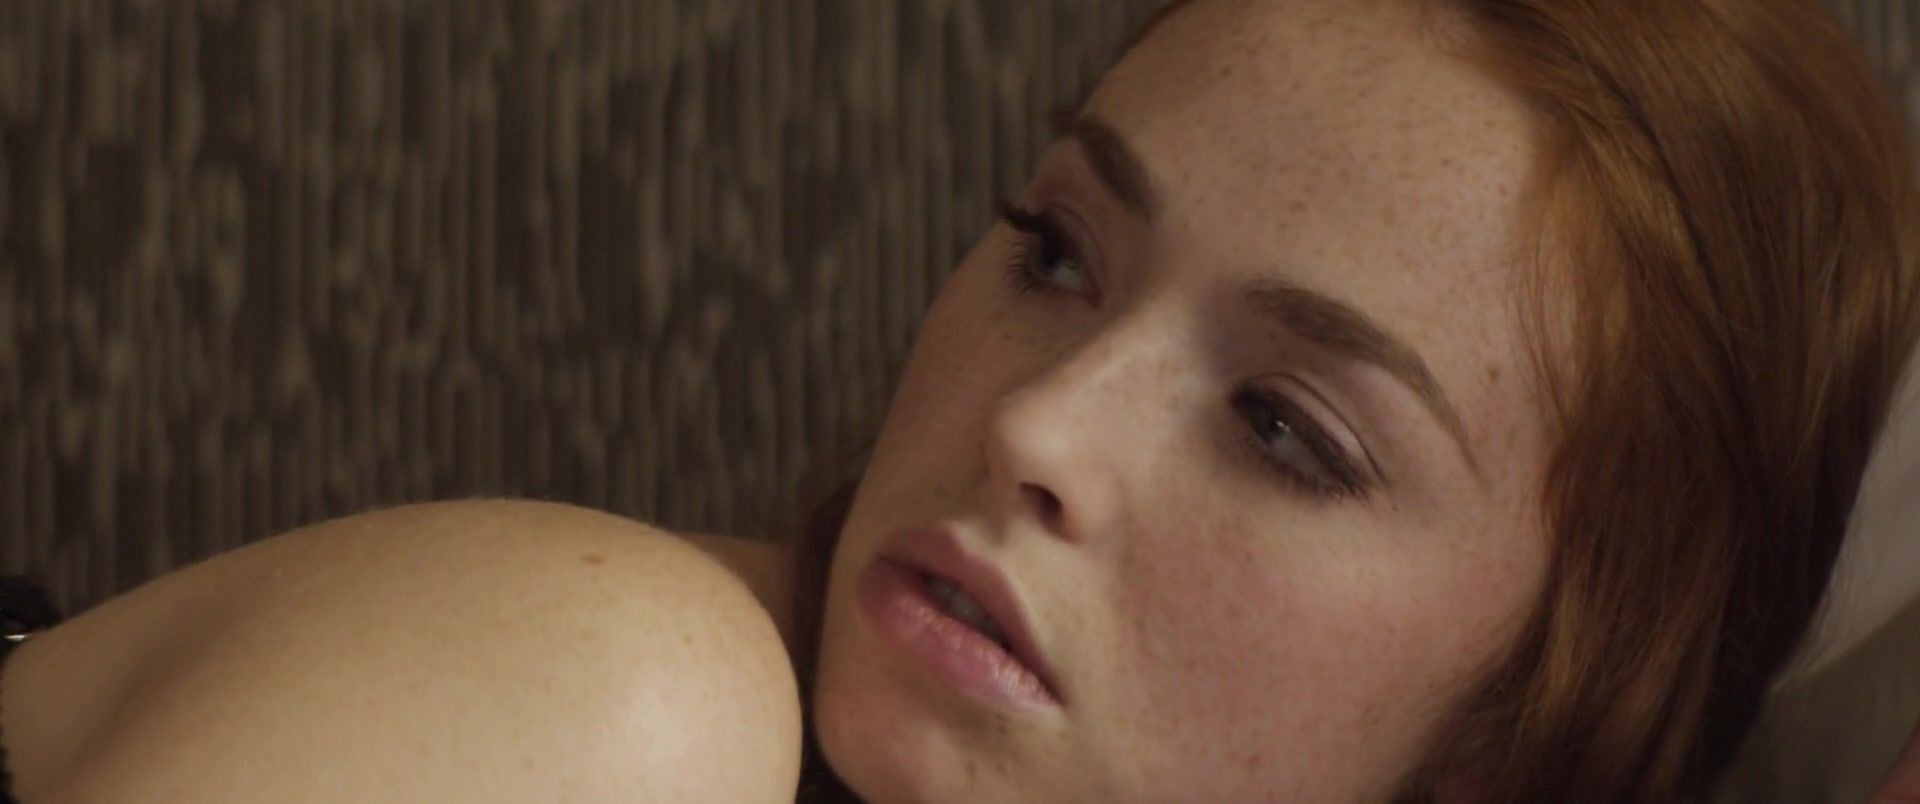 Gape Freya Mavor - The Lady in the Car with Glasses and a Gun (2015) Roughsex - 1